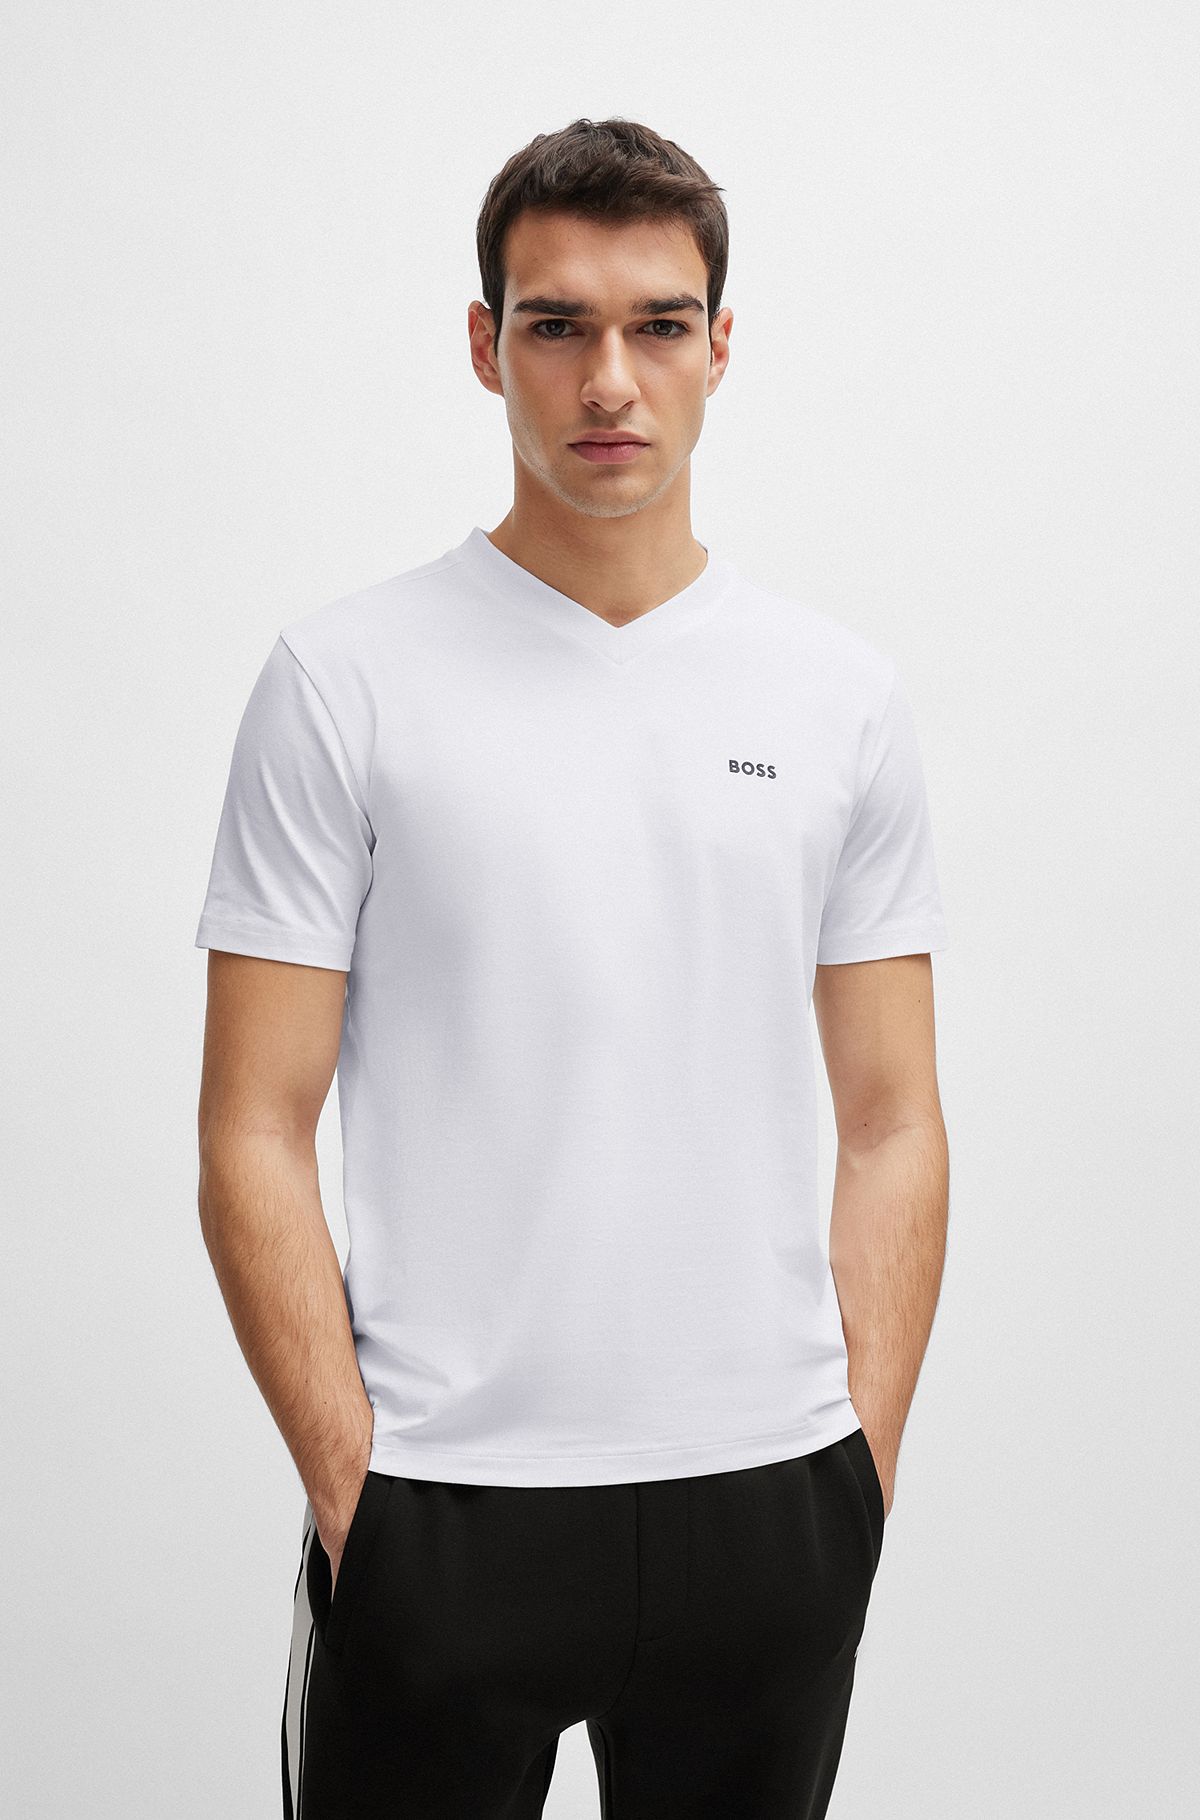 T-Shirts in White by HUGO BOSS